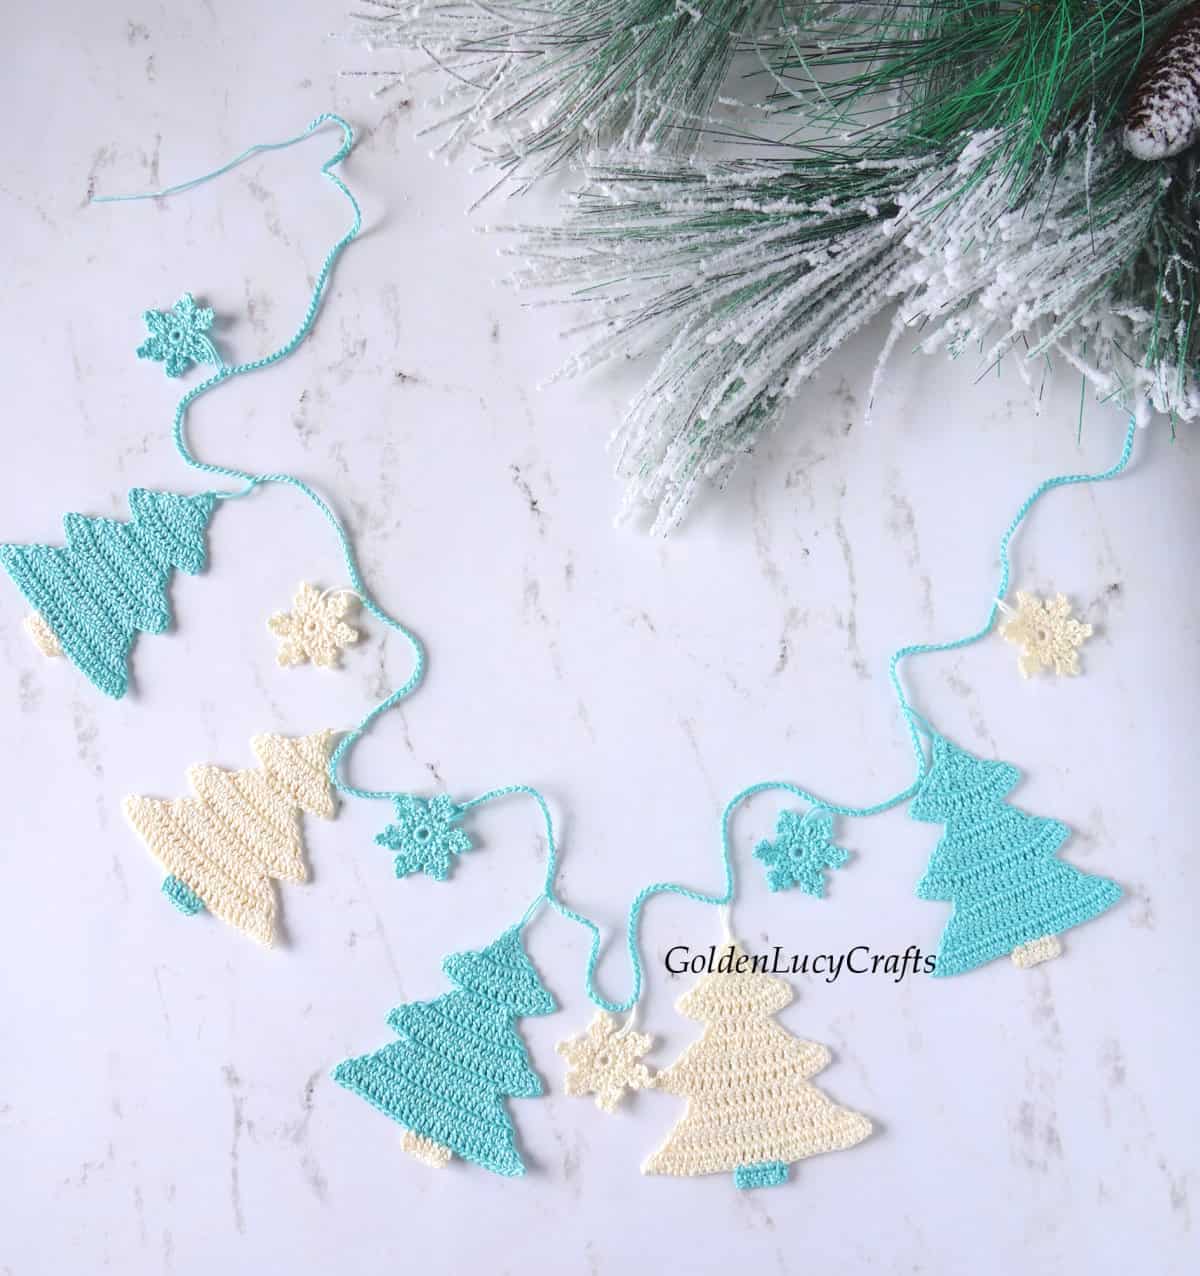 Crochet Christmas tree garland in turquoise and cream colors.